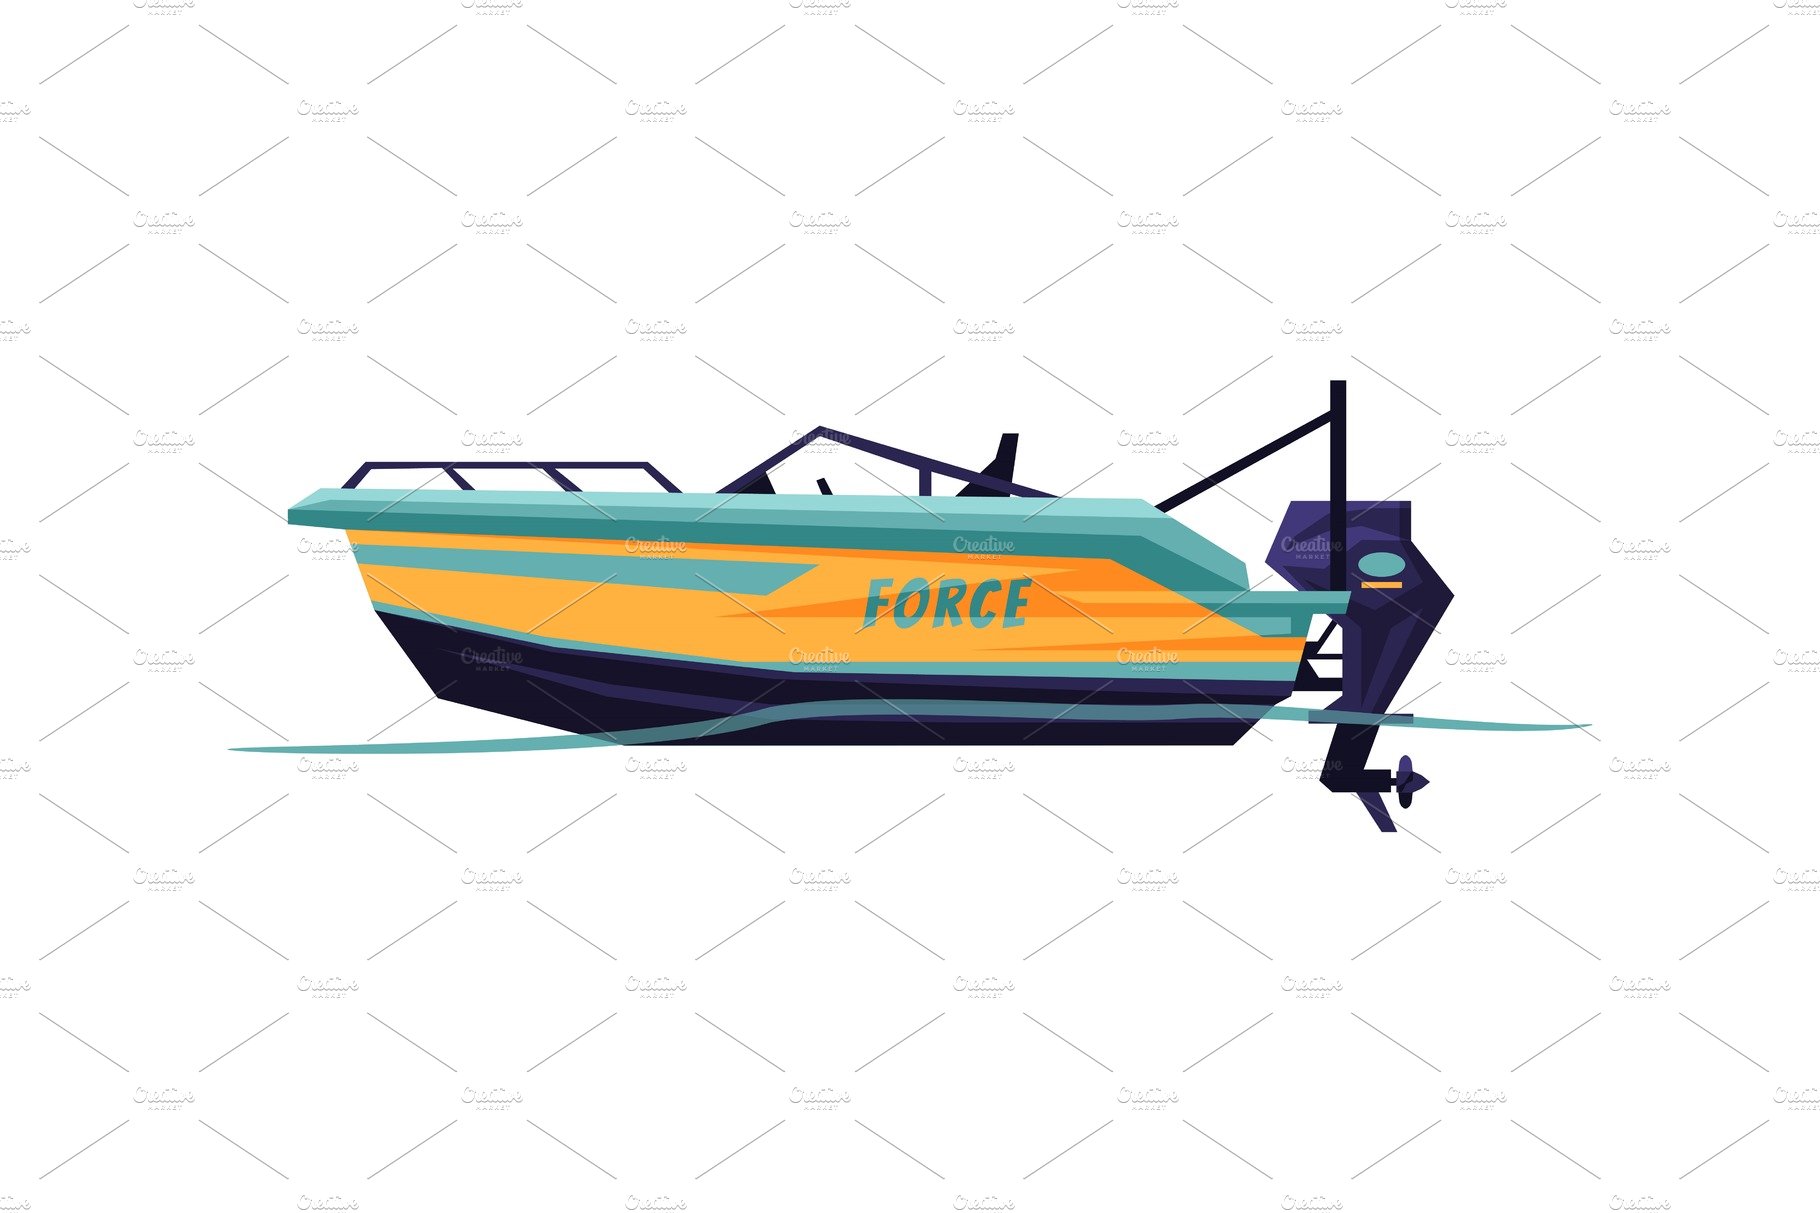 Power Boat, Speedboat, Sailboat cover image.